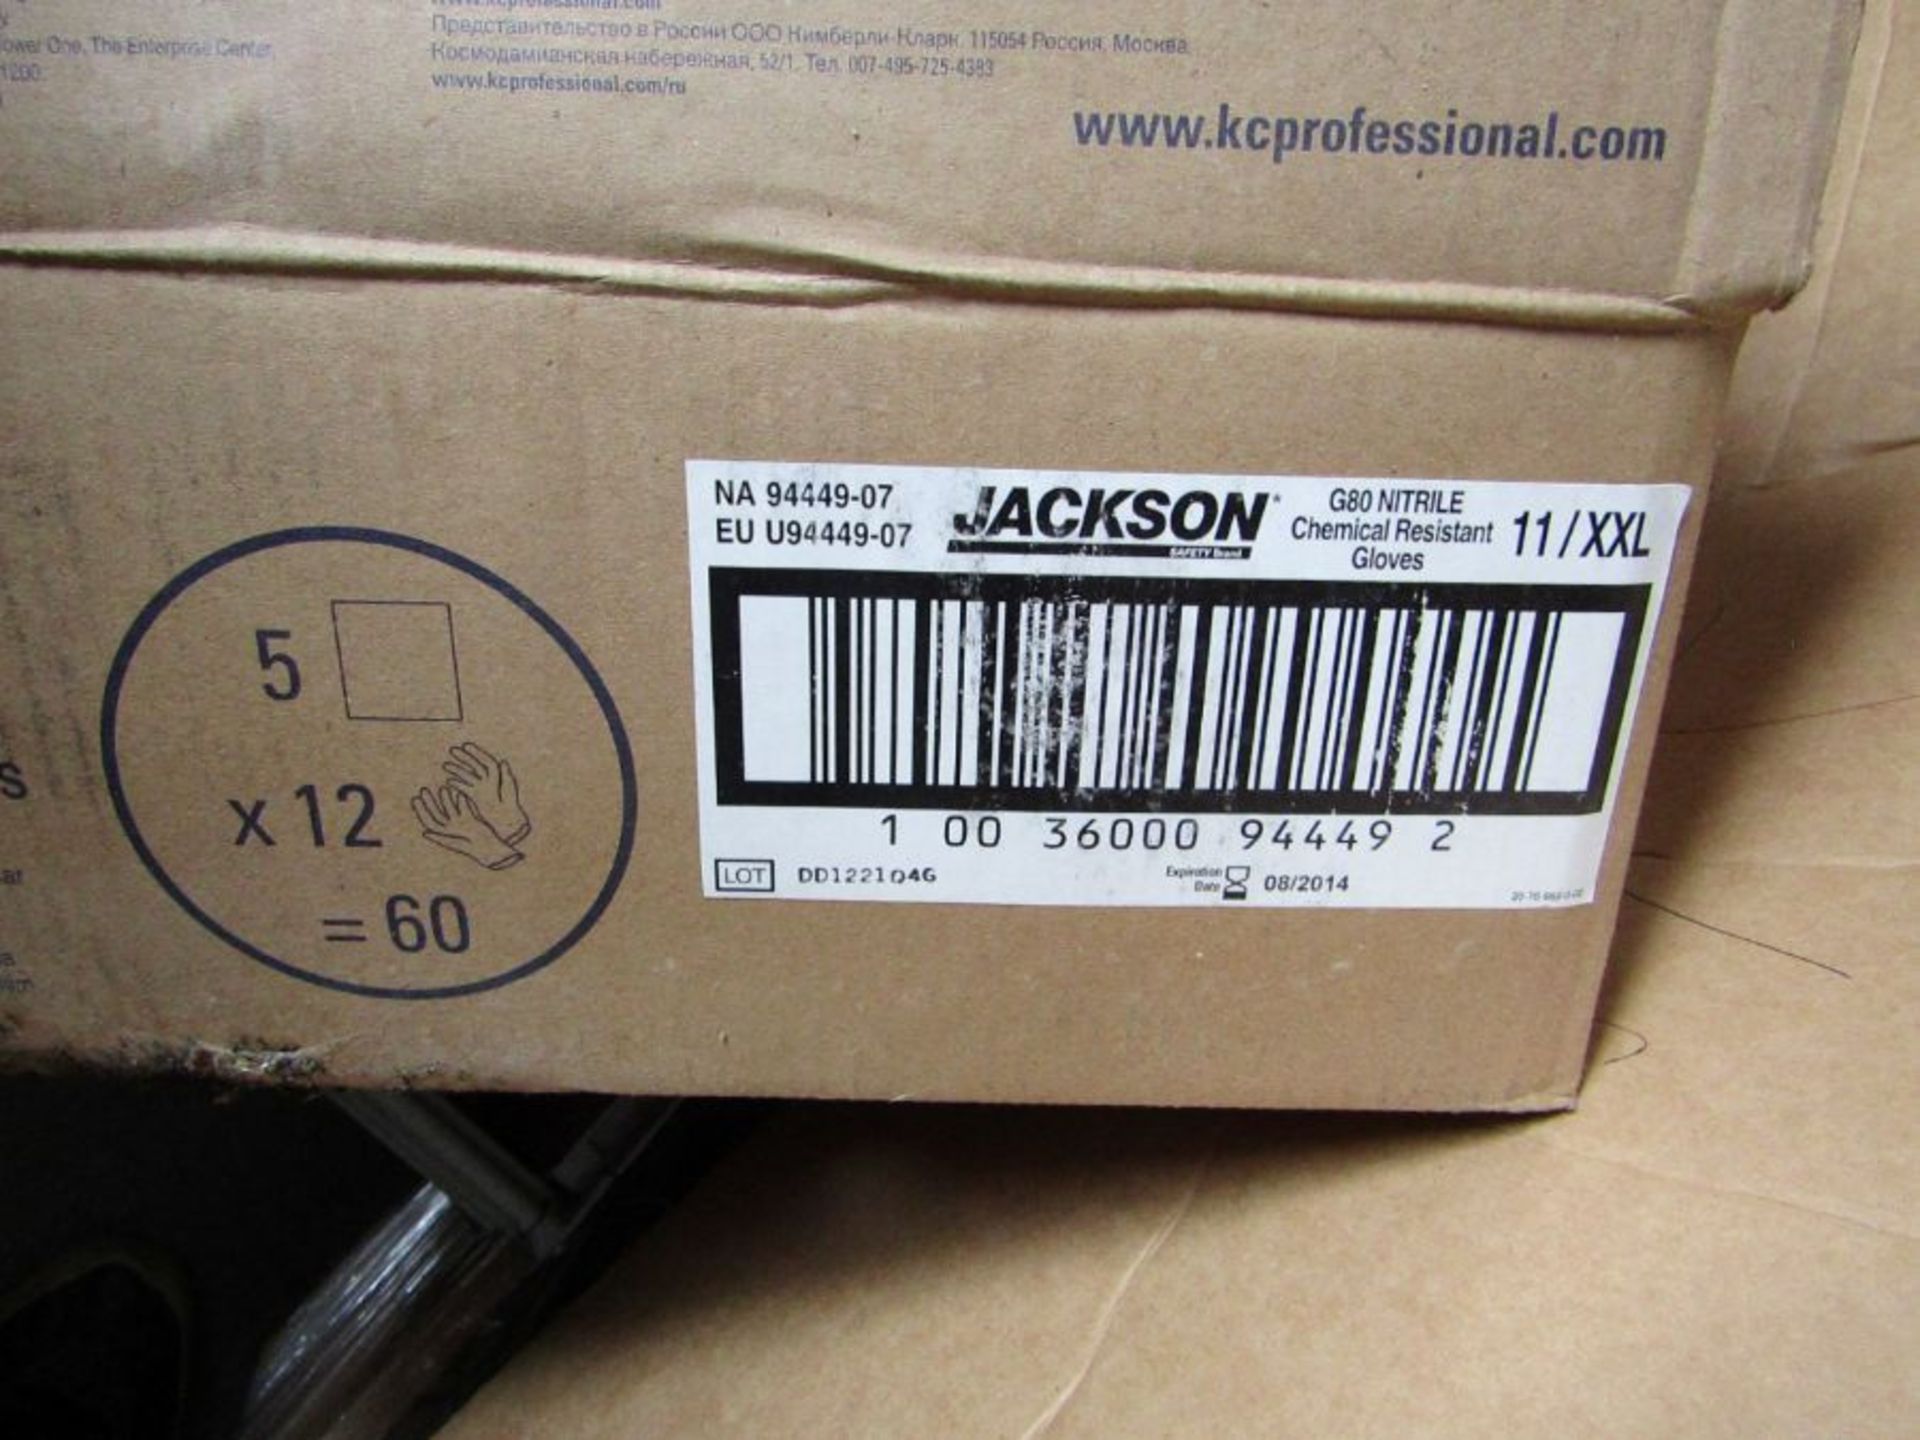 Box of 60 Pairs Jackson G80 Chemical Resistant Nitrile Gloves Size 11 XXL - Table 2000089077 - Image 3 of 6